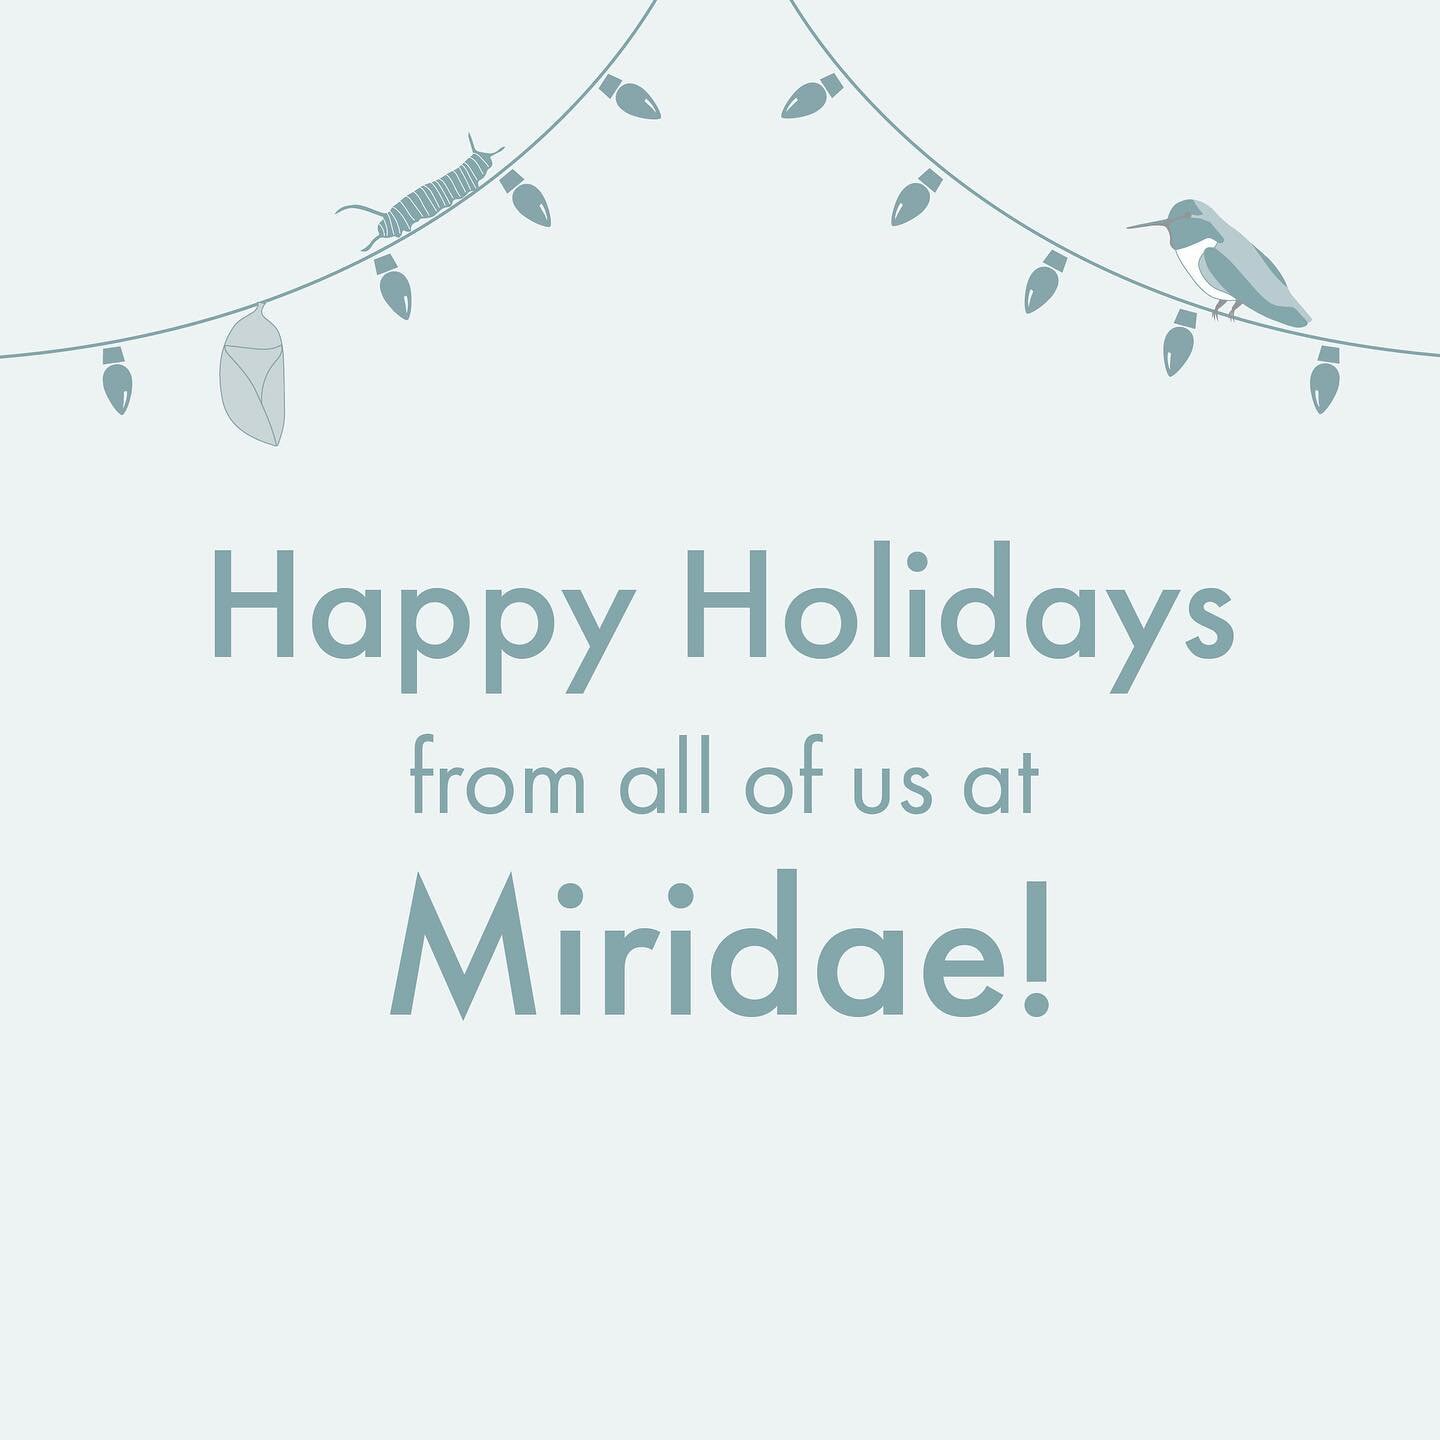 Best wishes to all of our clients, collaborators, and friends this holiday season and in the new year!